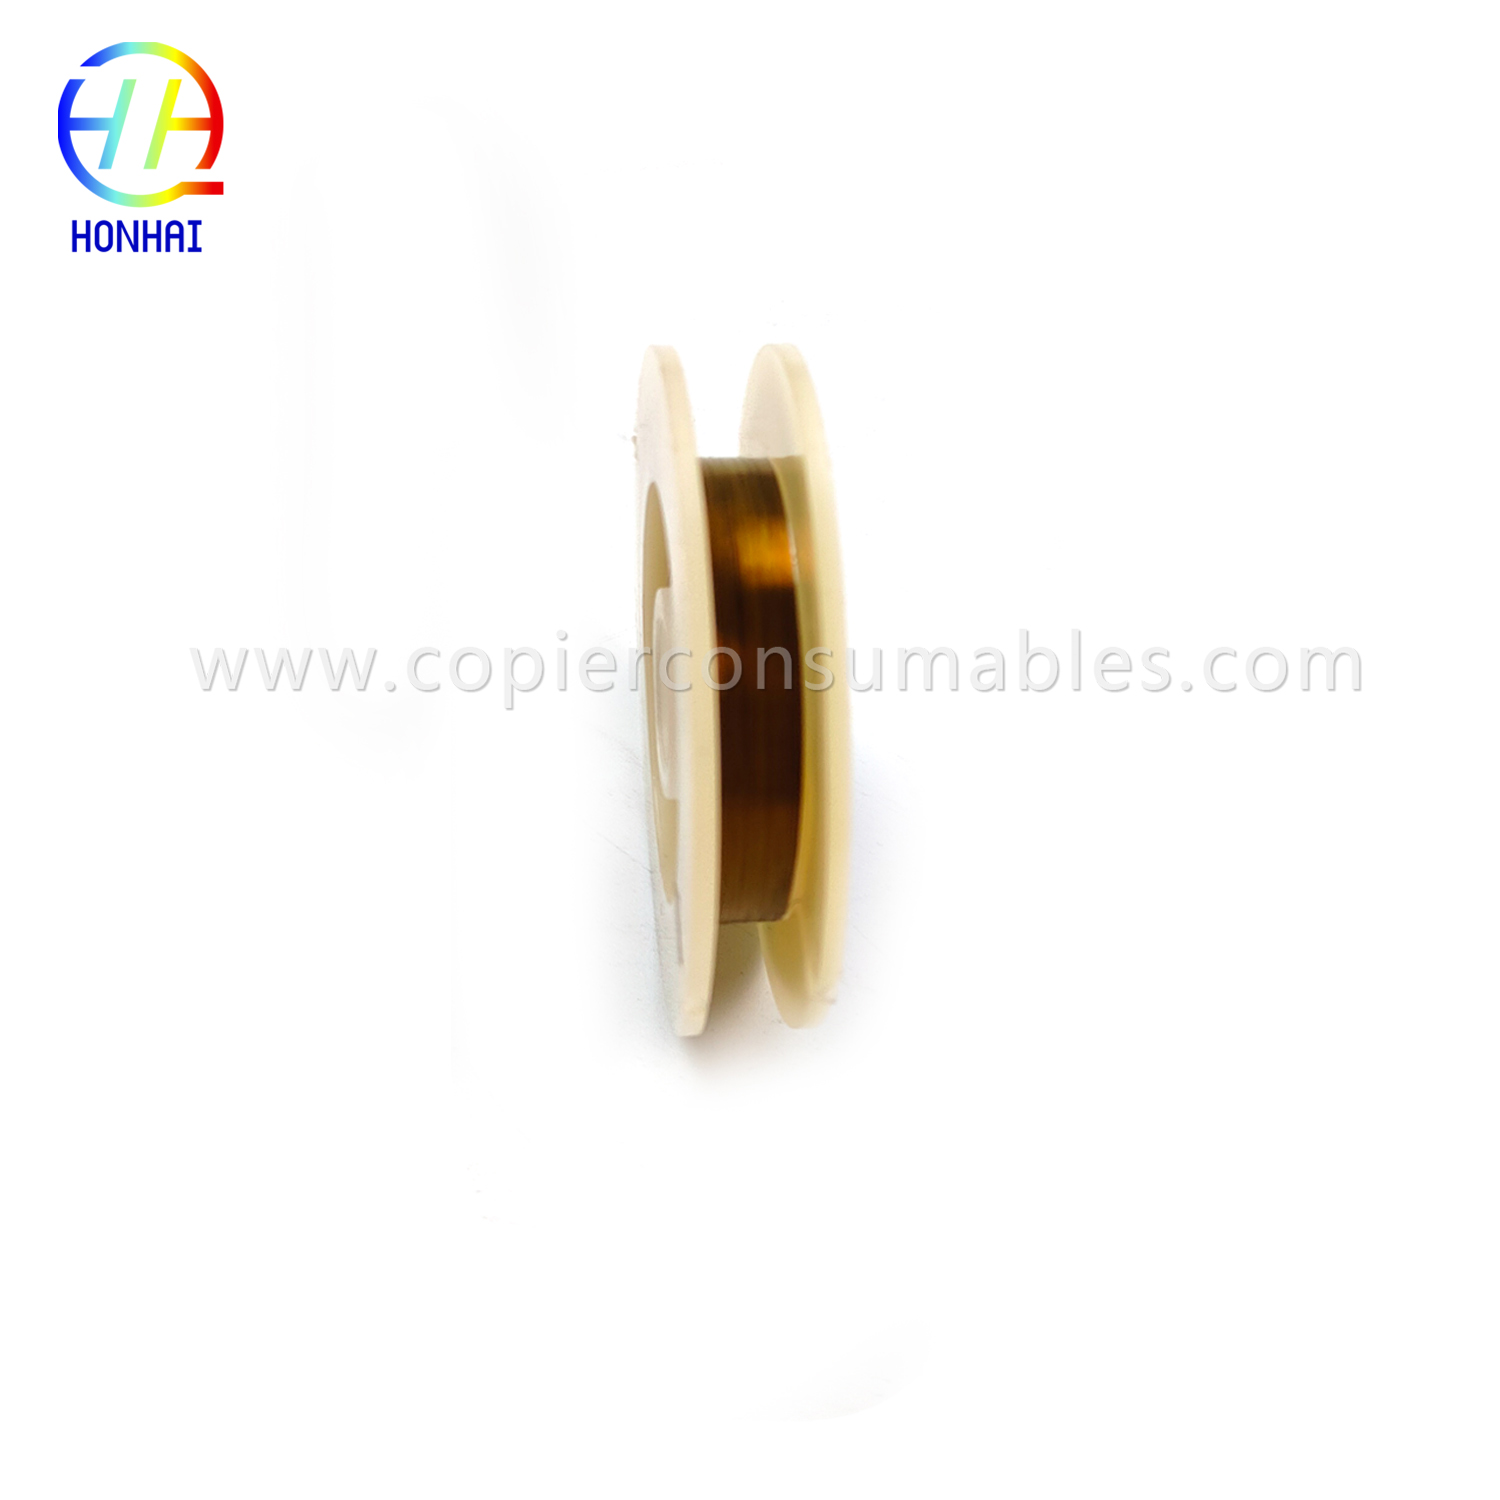 https://www.copierconsumables.com/wire-electrode-for-canon-ir5000-6275-8205-6075-8105-8505-8295-6575-product/